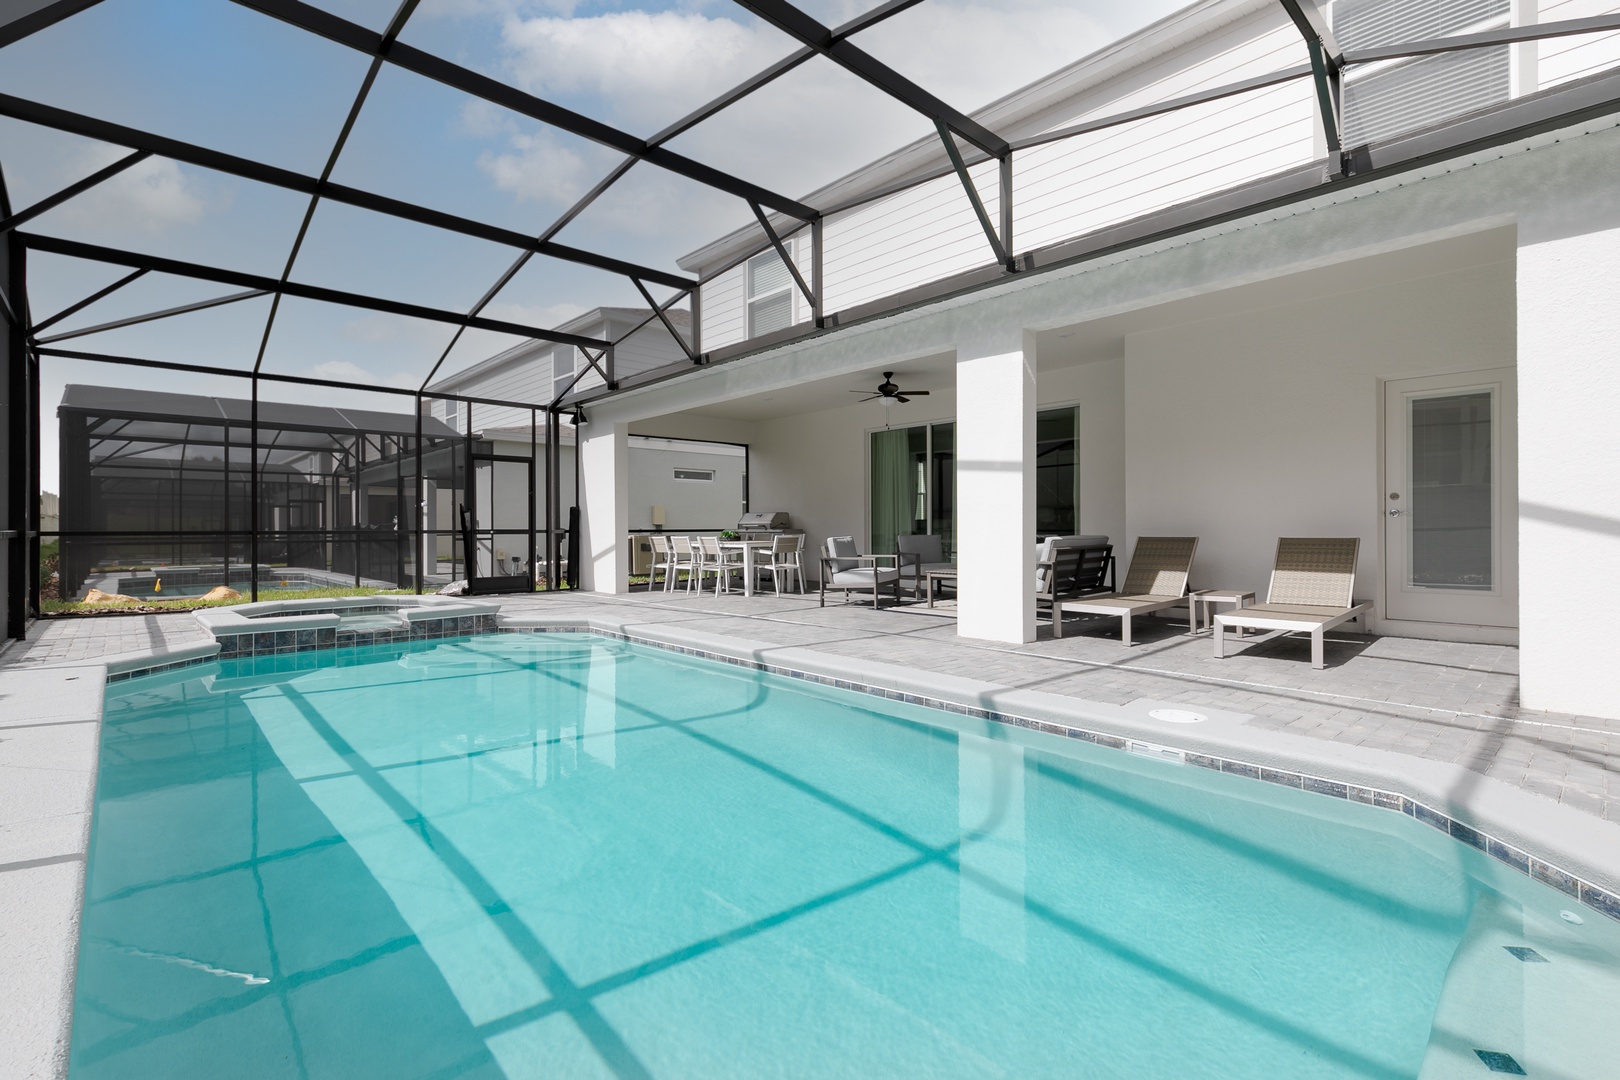 Lounge the day away or make a splash in your own private, covered pool!